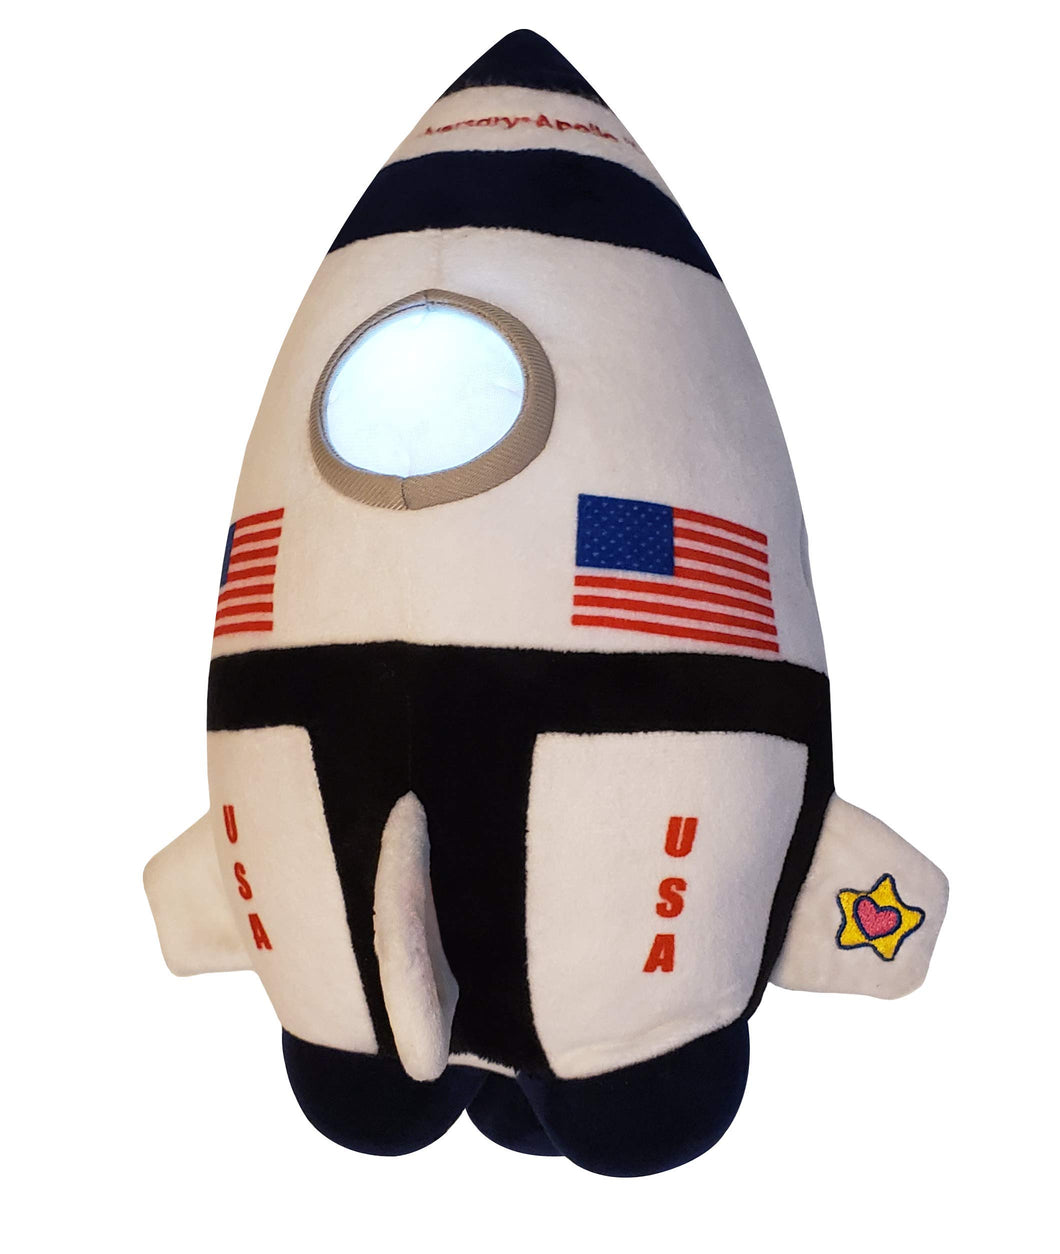 Neil The Rocket | Embroidered 50th Anniversary of The Apollo 11 Moon Landing